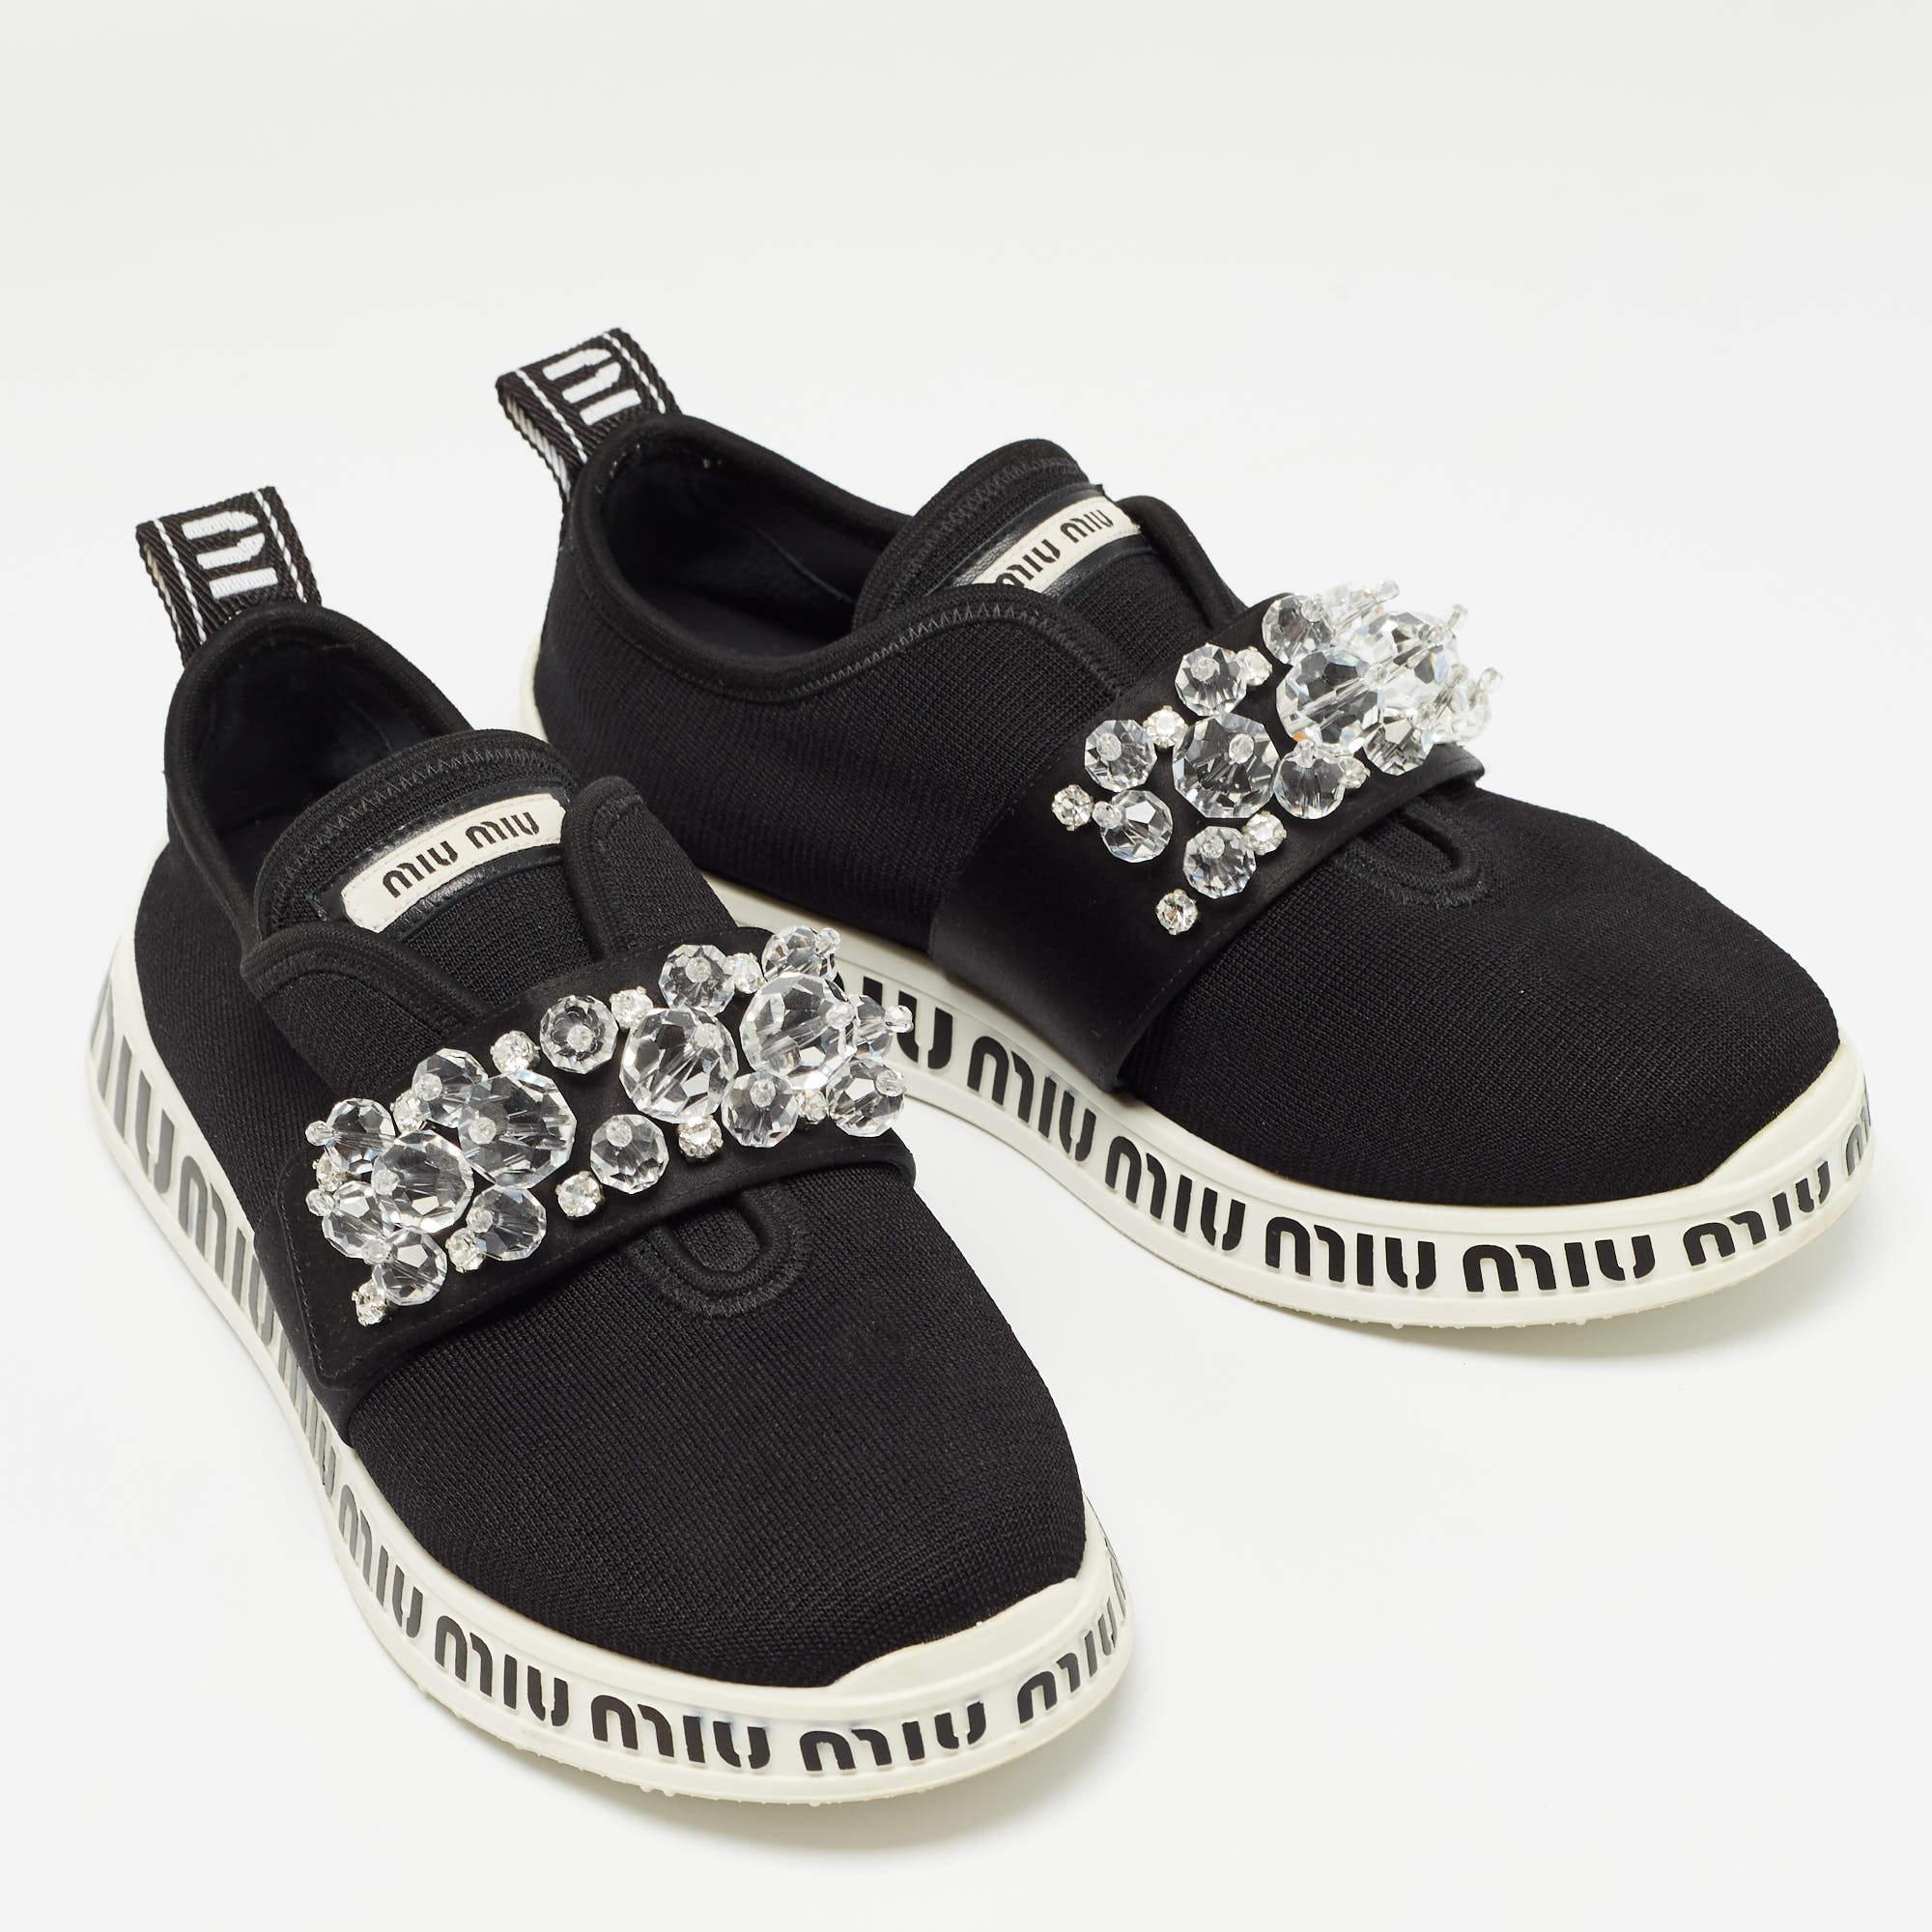 Women's Miu Miu Black Fabric and Satin Crystal Embellished Slip On Sneakers Size 38.5